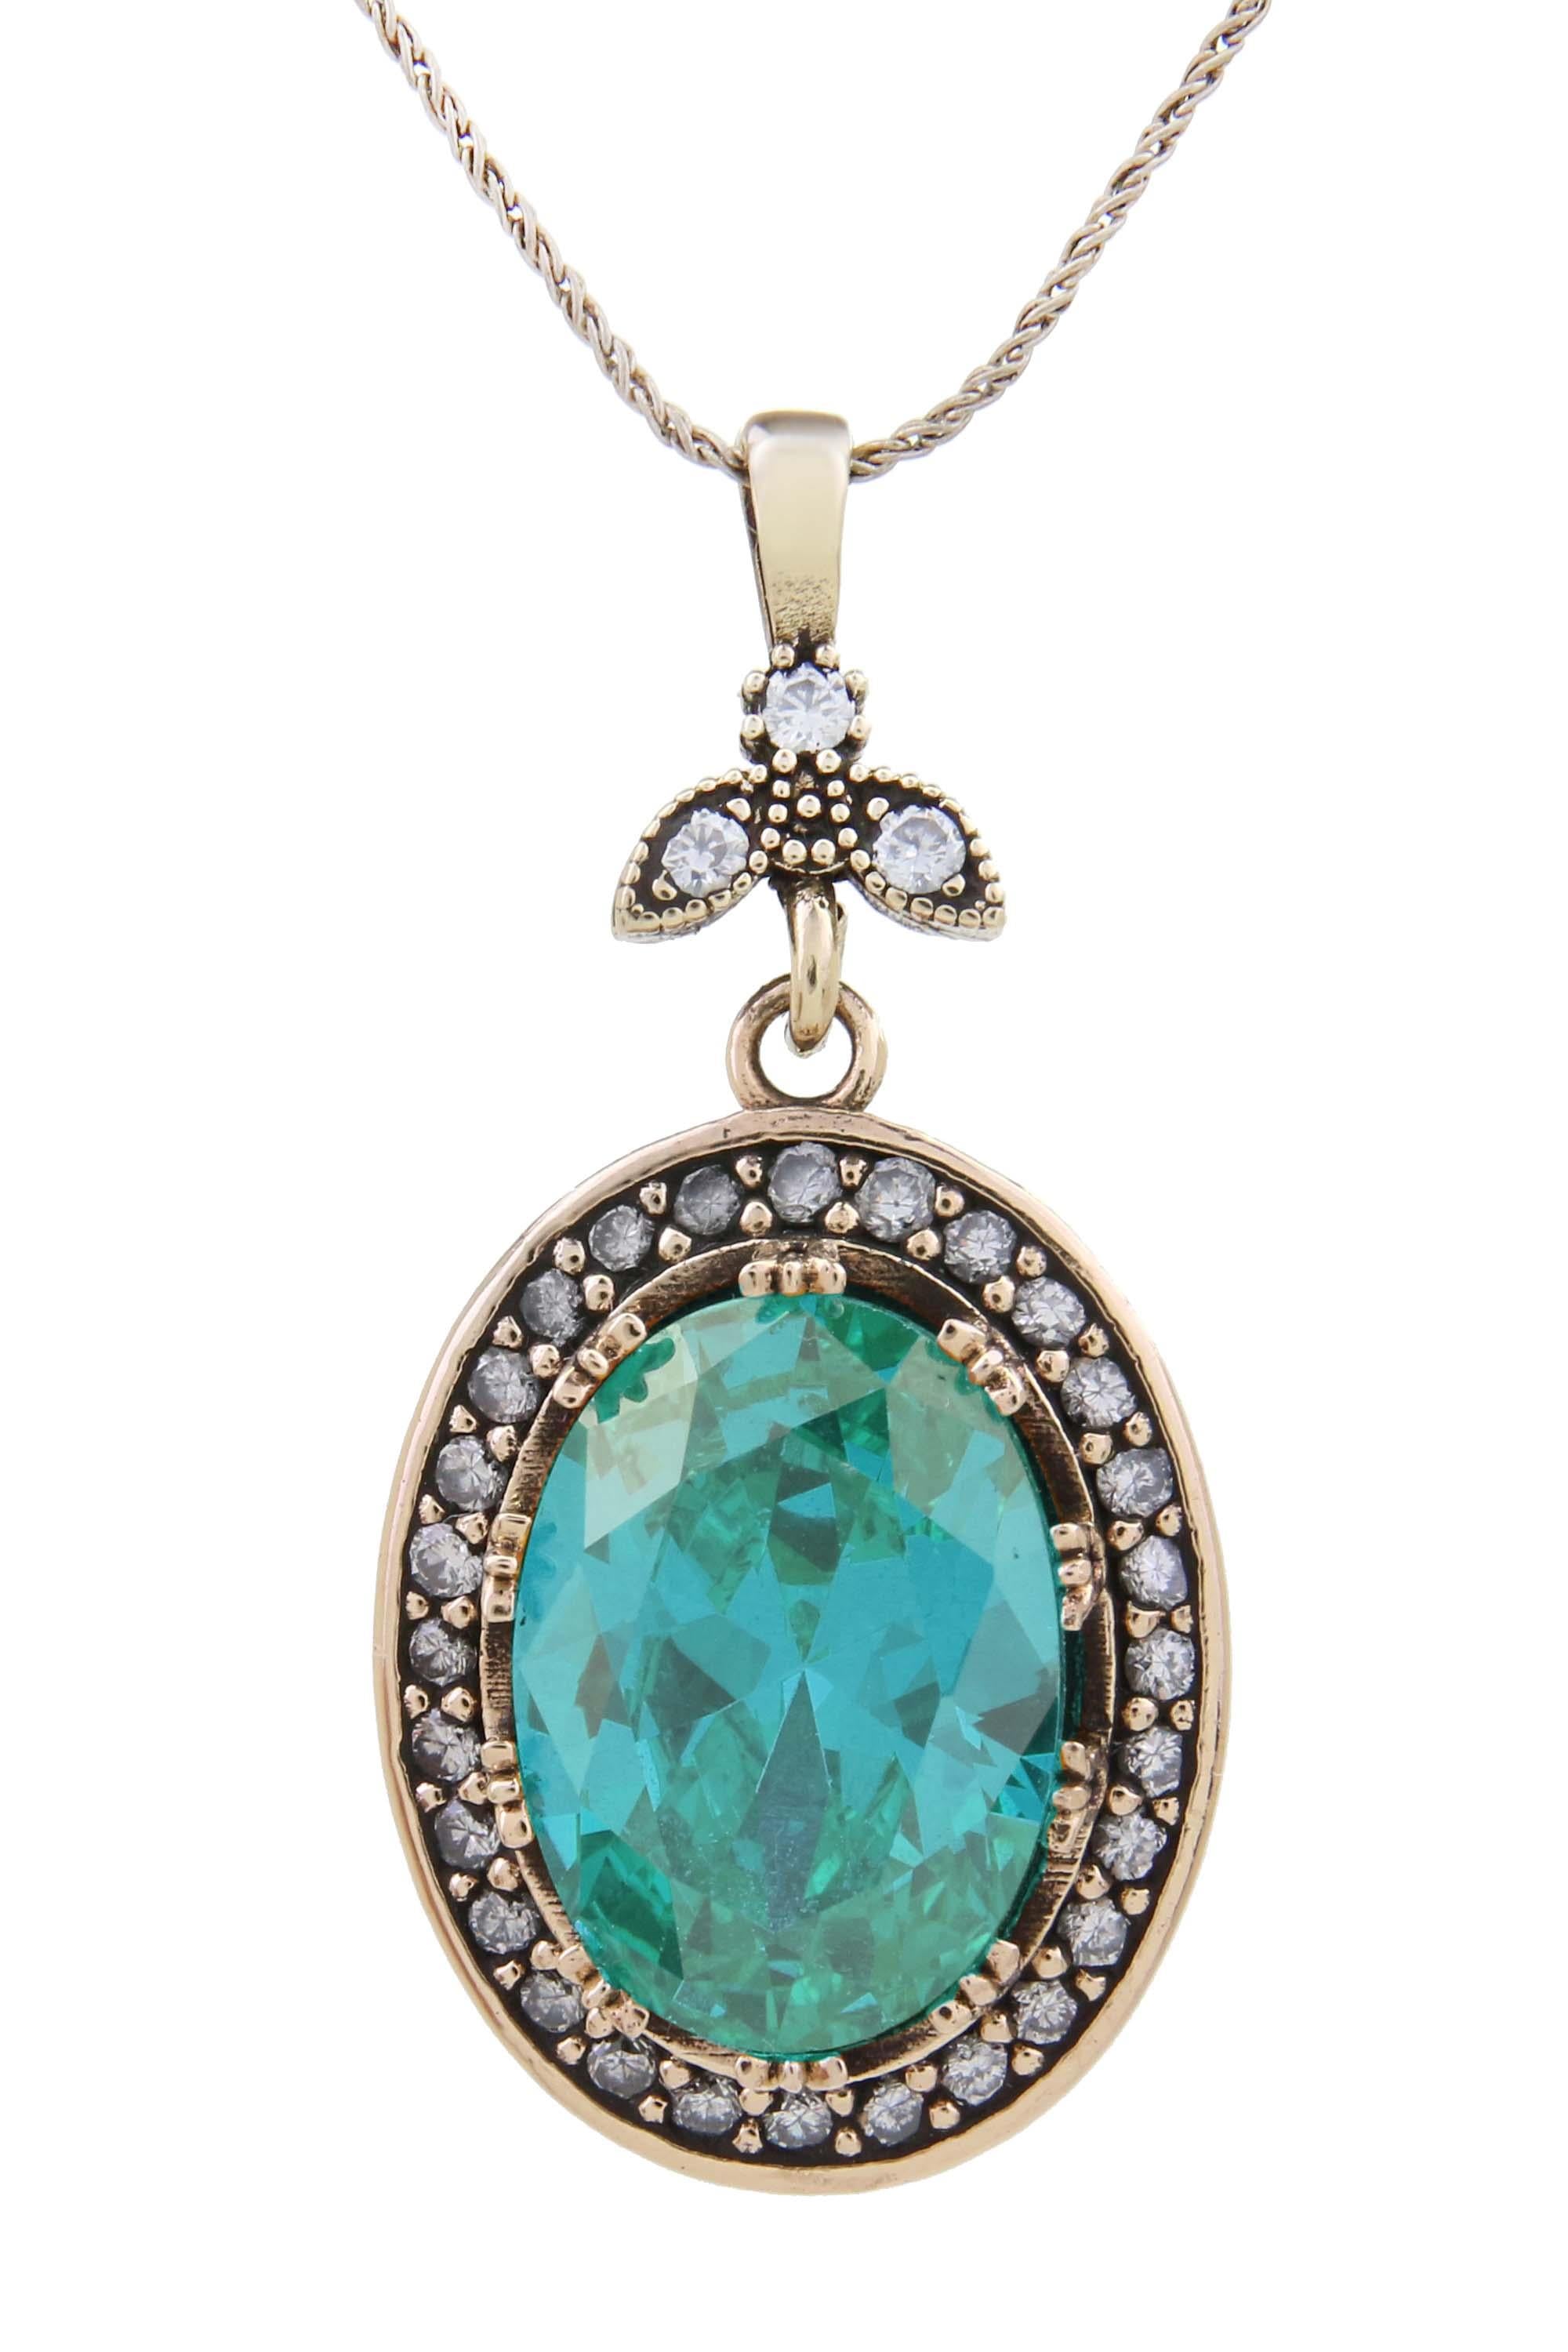 Authentic Series Aquamarine Blue Color Stone Authentic Sterling Silver Women's Necklace